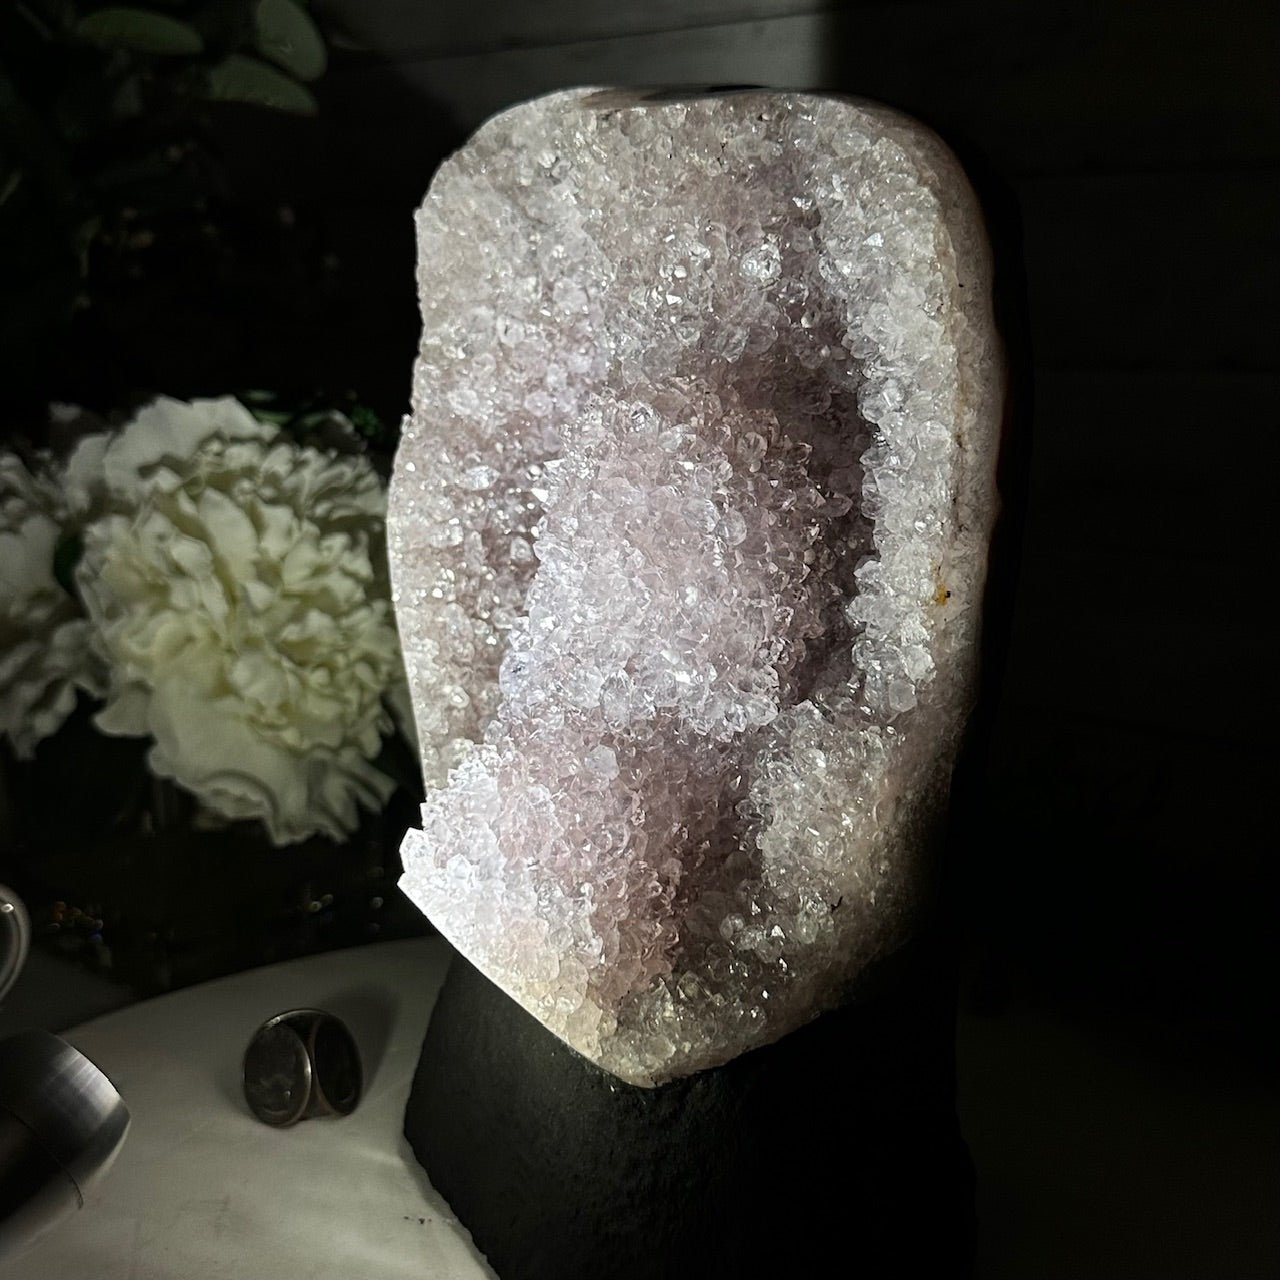 Standard Quality Amethyst Crystal on Cement Base, 11.3 lbs and 9.5" Tall #5614-0074 - Brazil GemsBrazil GemsStandard Quality Amethyst Crystal on Cement Base, 11.3 lbs and 9.5" Tall #5614-0074Clusters on Cement Bases5614-0074